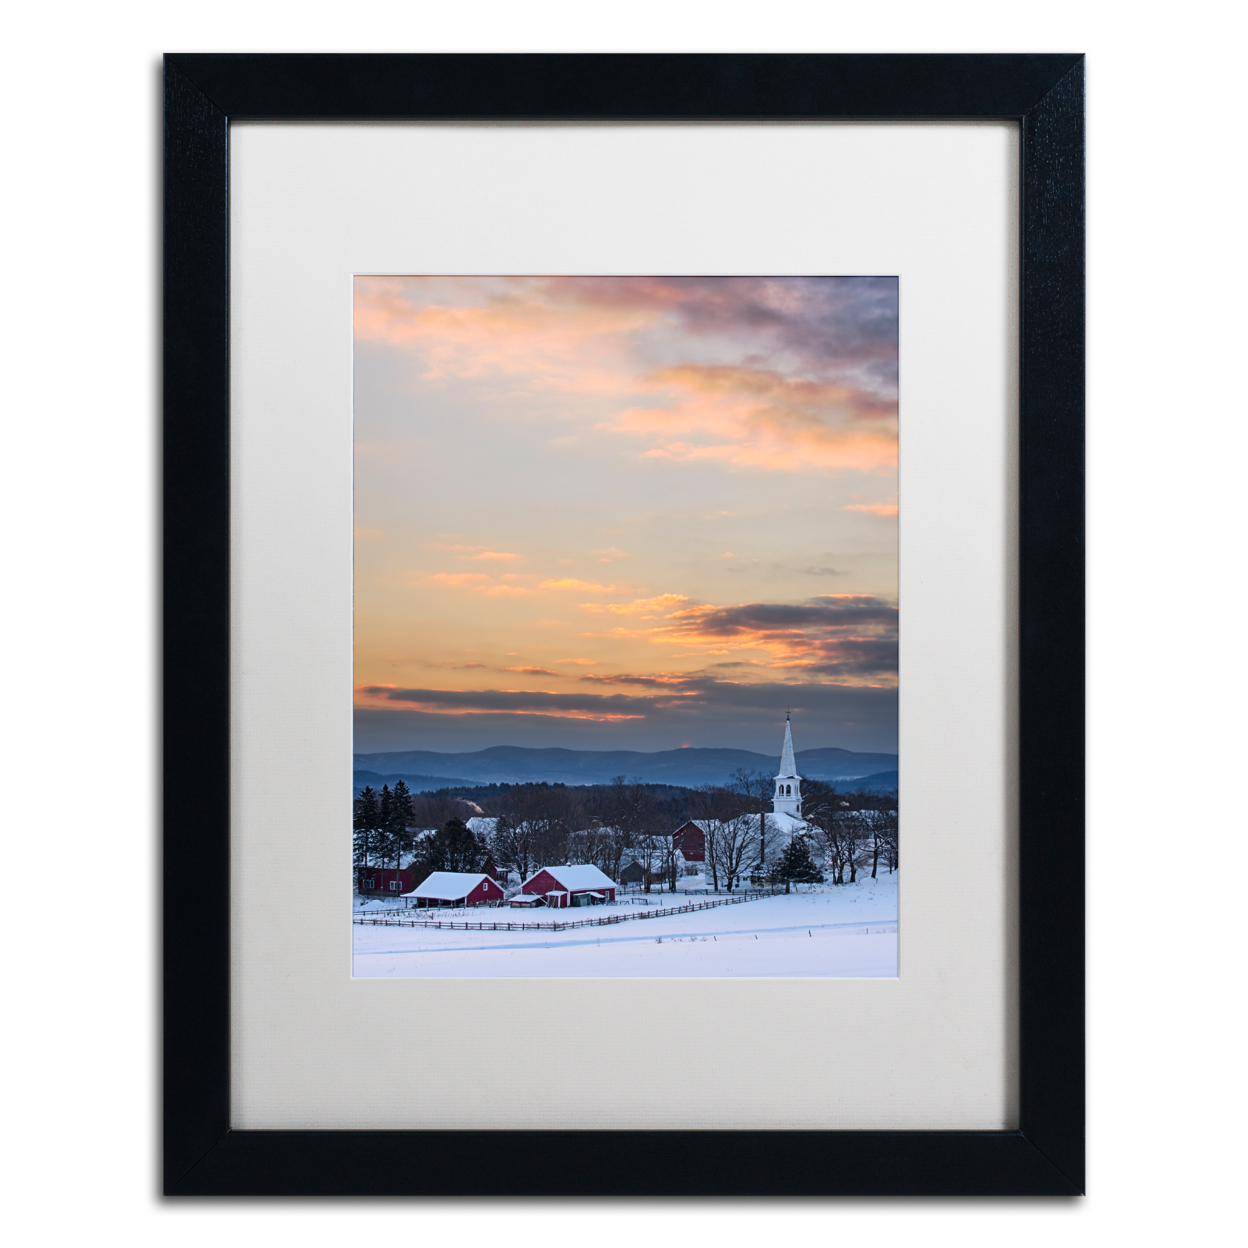 Michael Blanchette Photography 'Morning Glow' Black Wooden Framed Art 18 X 22 Inches